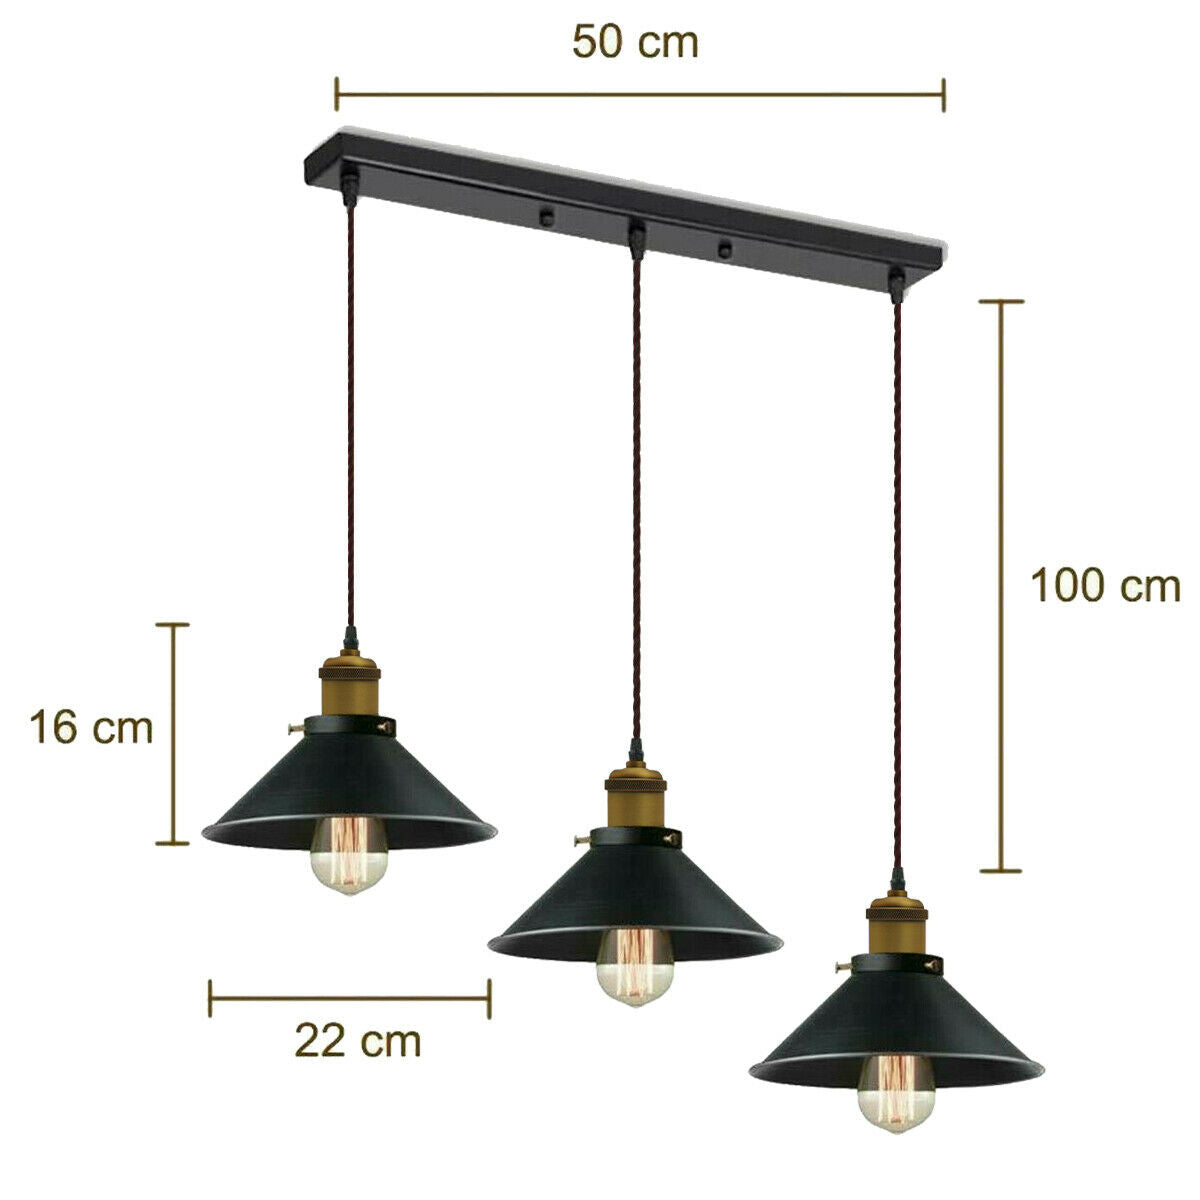 Chandelier Style Ceiling Pendant Light with FREE Bulbs Shade Industrial Loft Lampshades~2565 - LEDSone UK Ltd